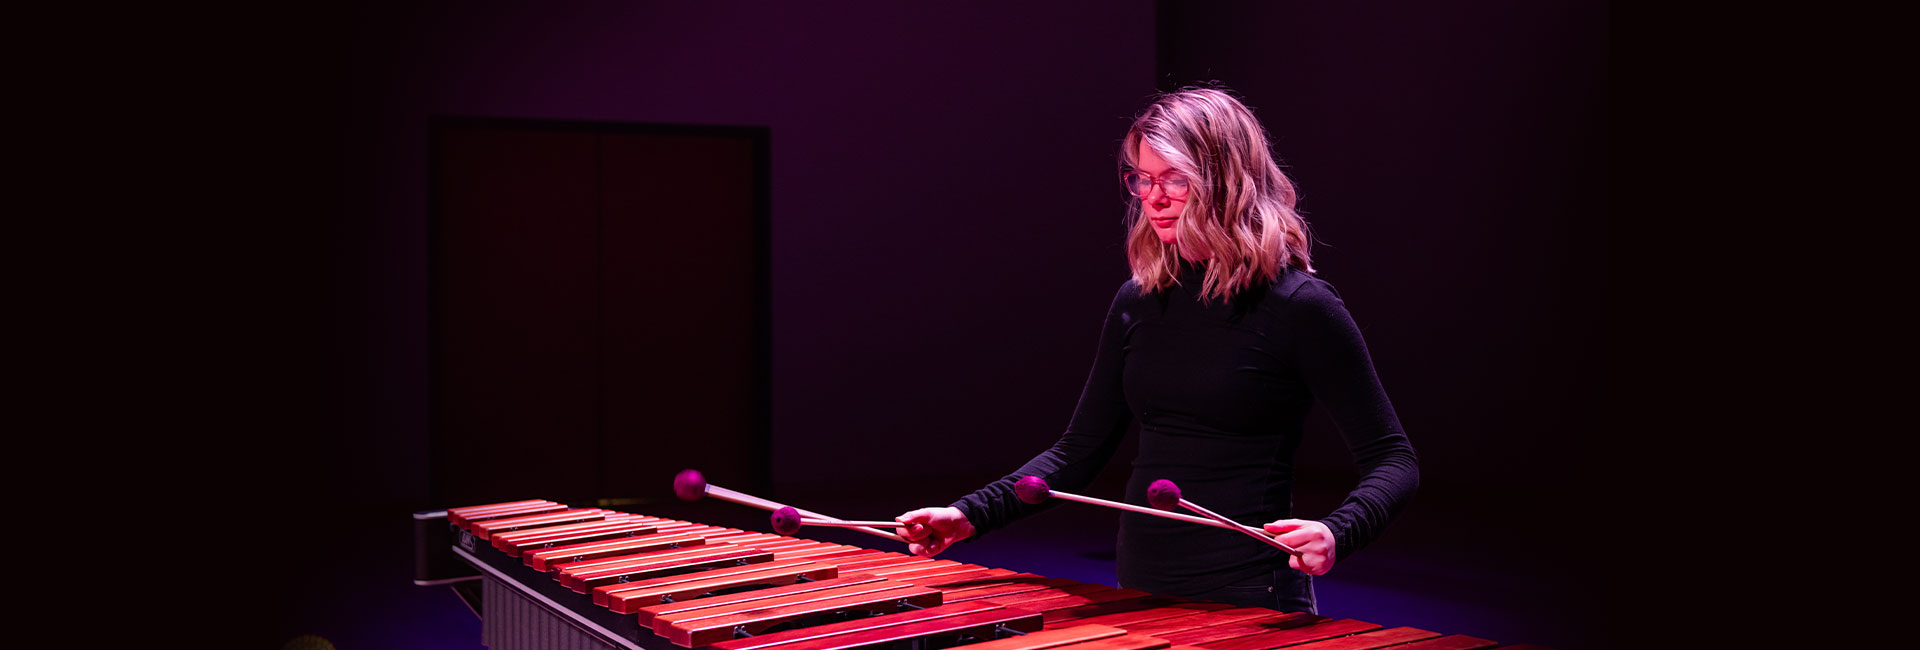 image of woman playing percussion